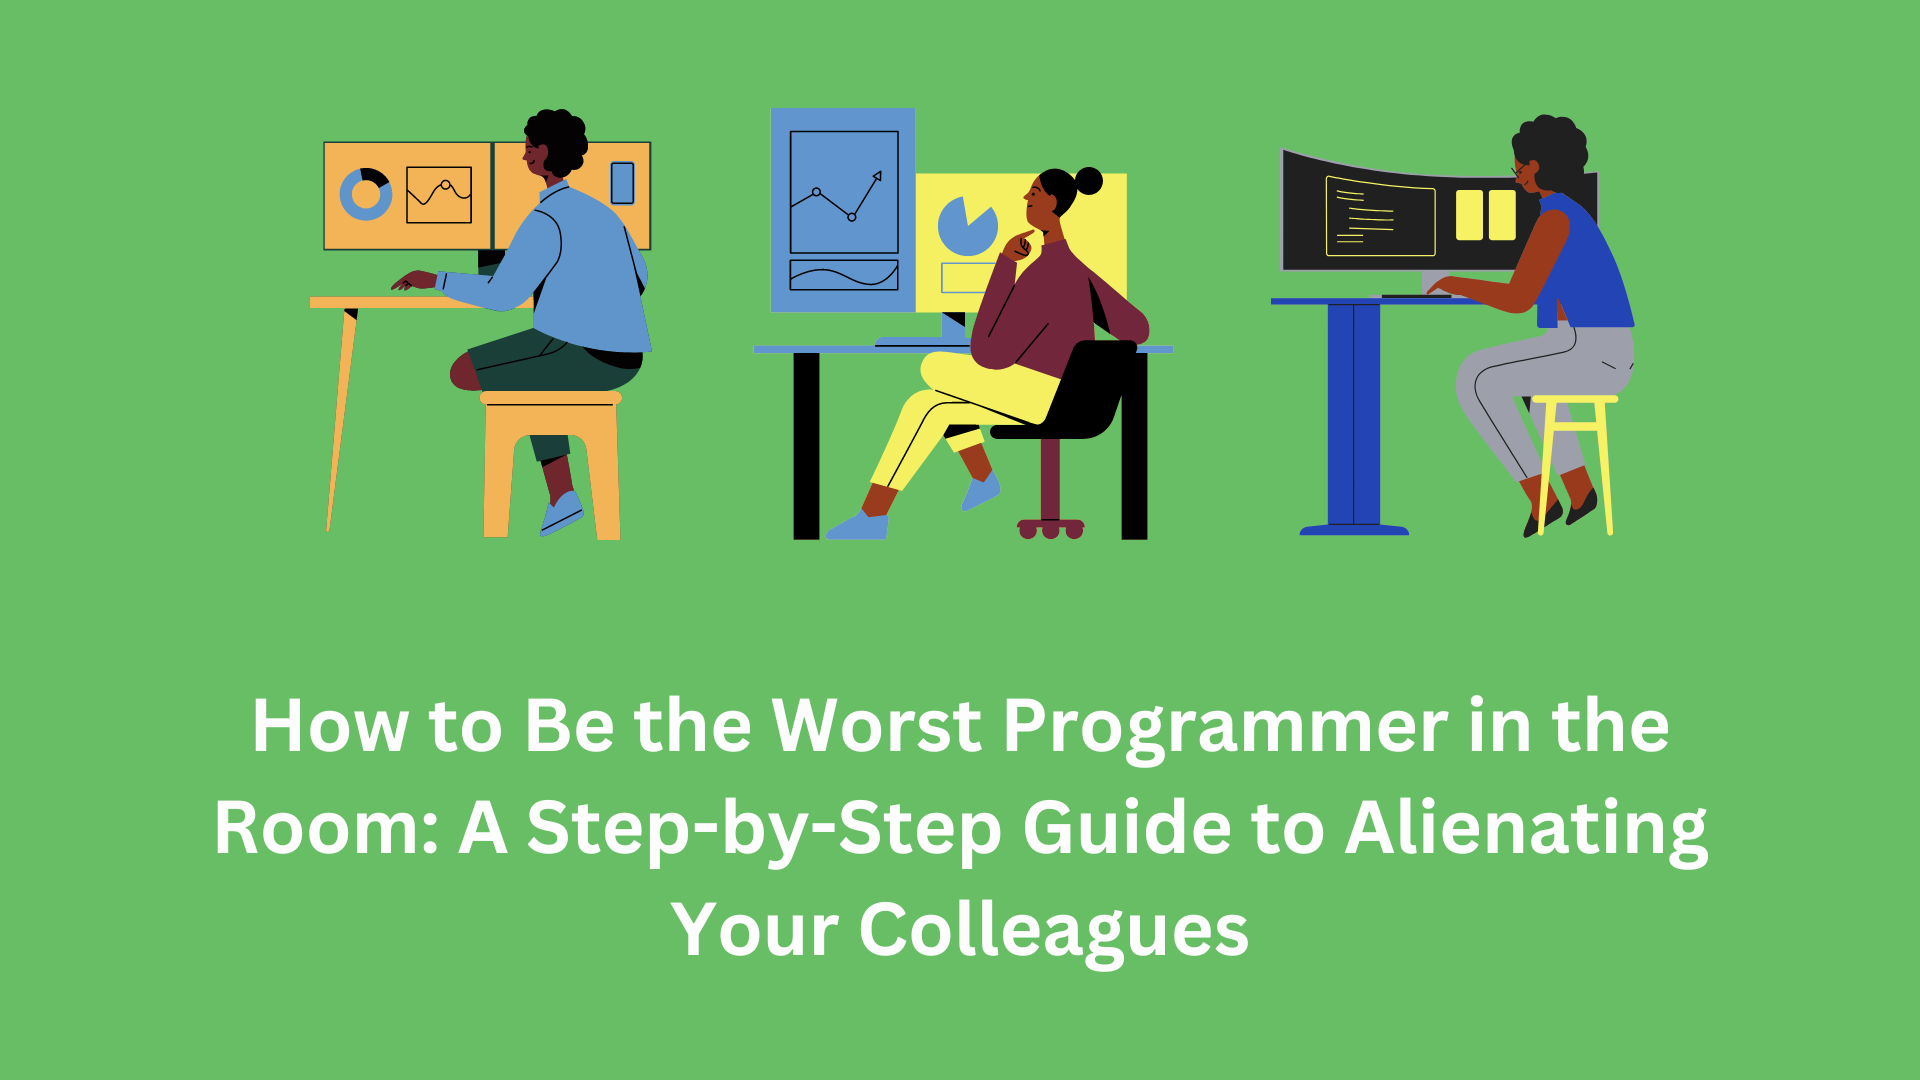 How to Be the Worst Programmer in the Room: A Step-by-Step Guide to Alienating Your Colleagues